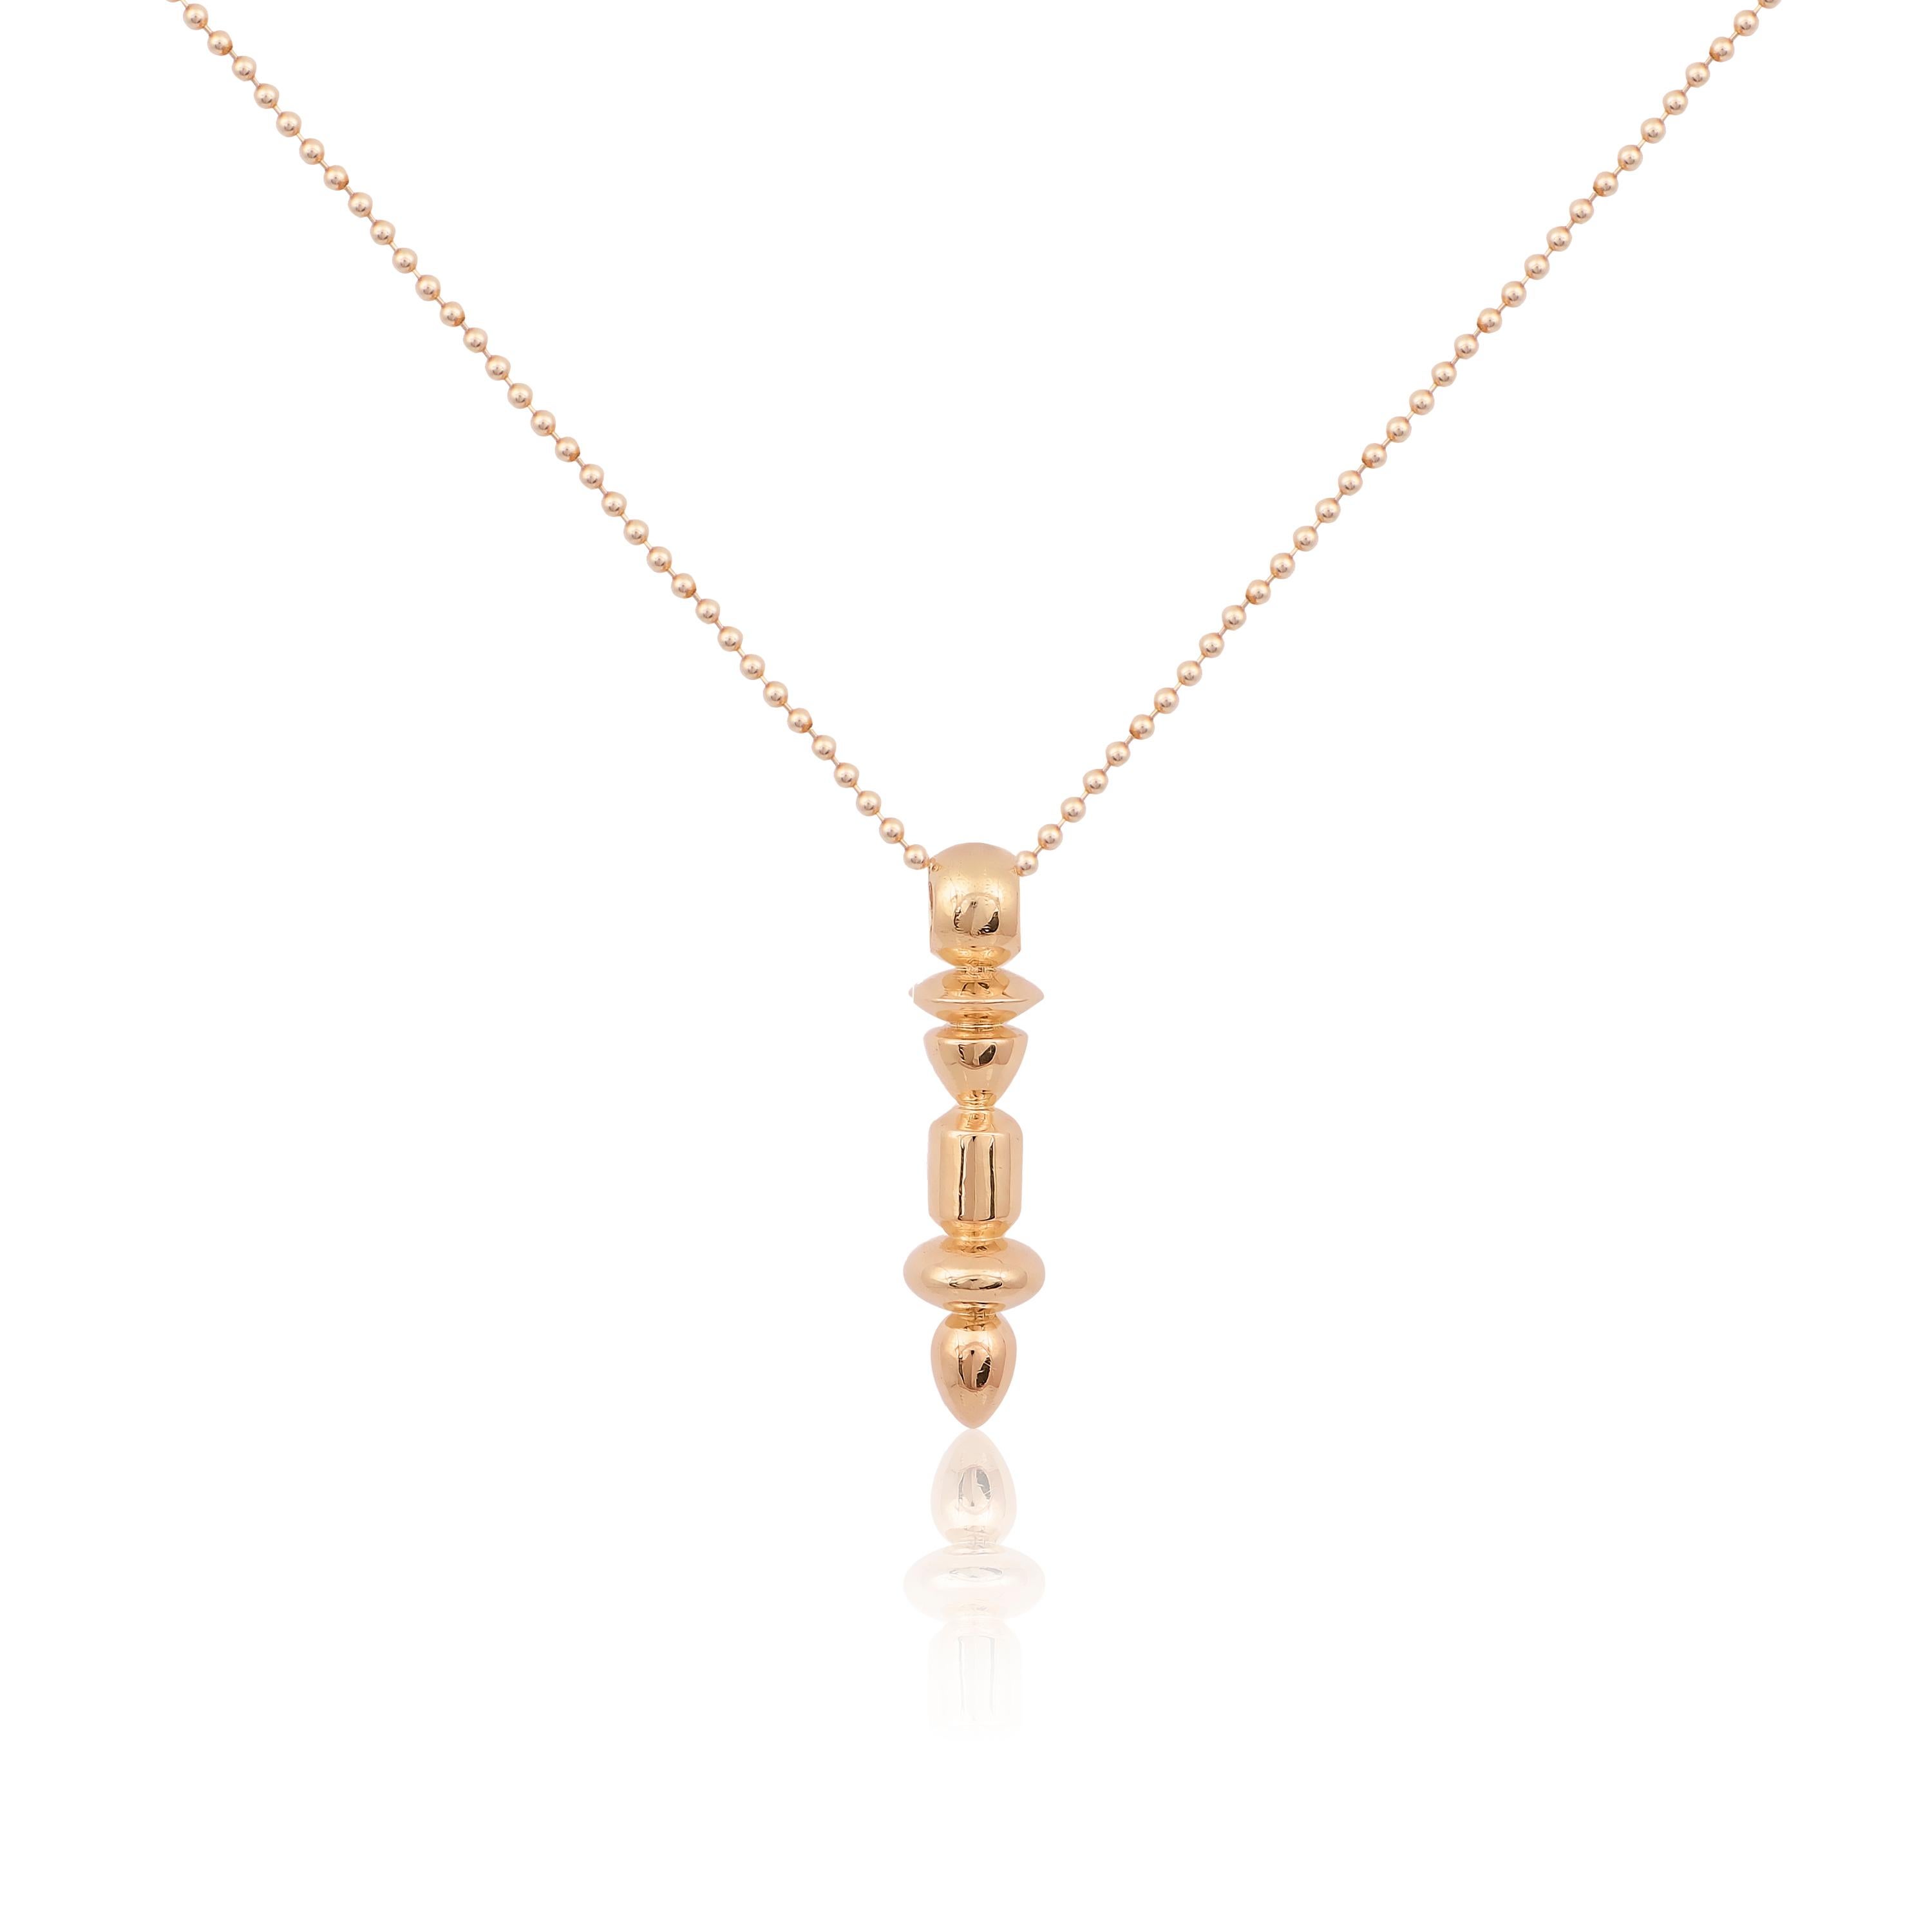 Designer: Alexia Gryllaki

Dimensions: motif 26x6mm, chain 450mm
Weight: approximately 7.8g (inc. chain) 
Barcode: NEX3007


Totem pendant in 18 karat yellow gold with a 450mm ball-chain that can be transformed into an earring, by hanging it through